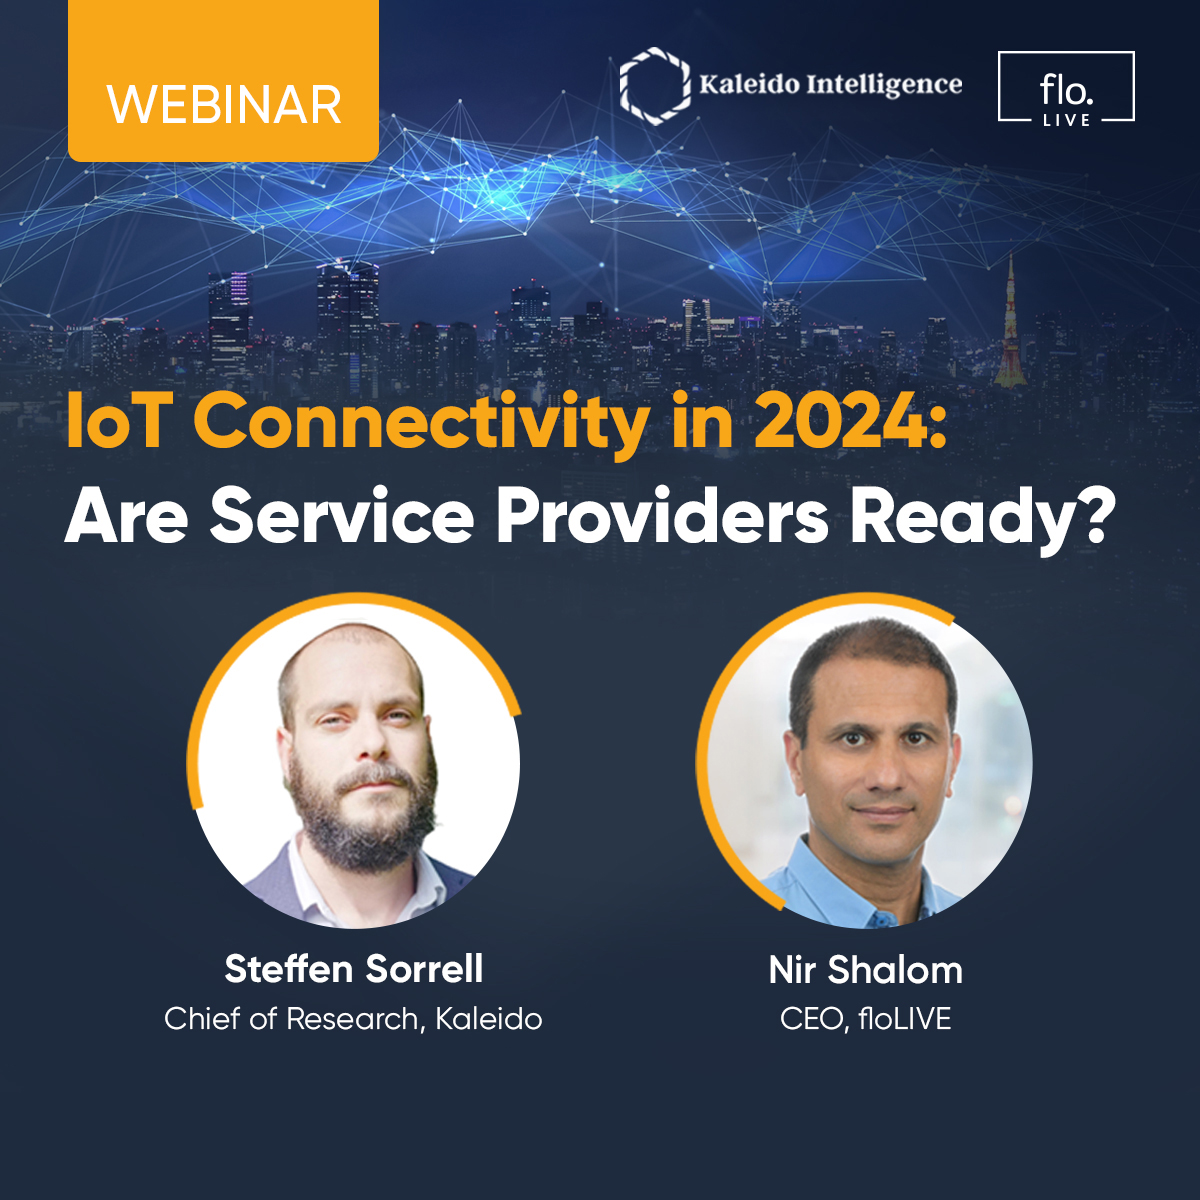 IoT Connectivity in 2024: Are Service Providers Ready? image